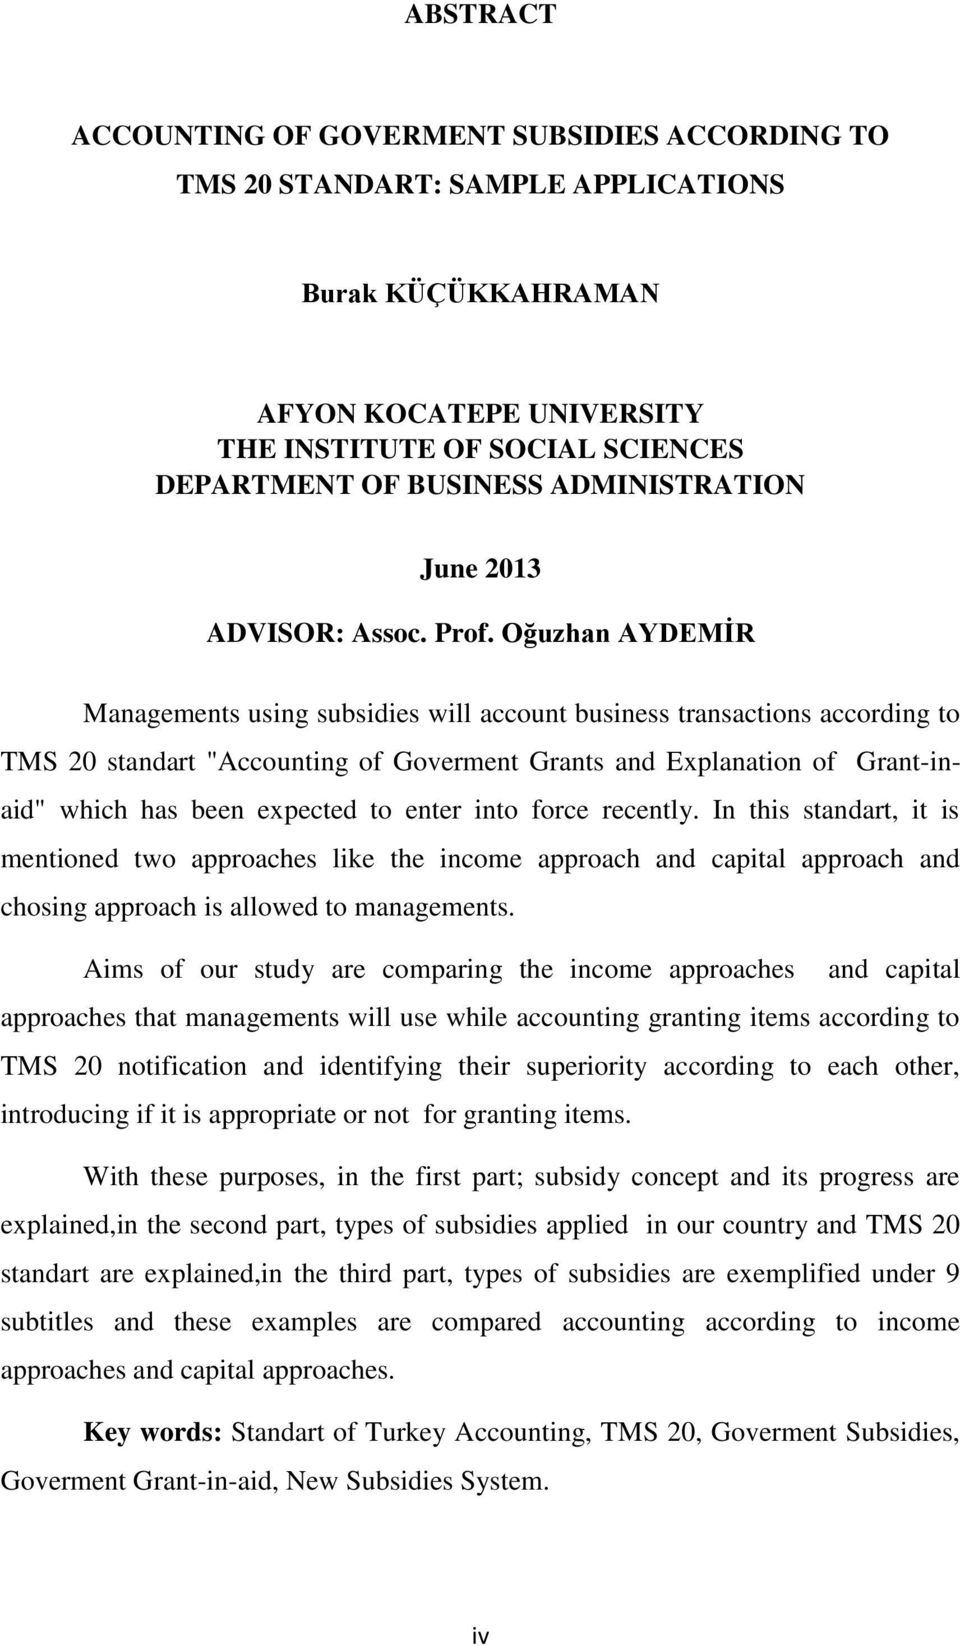 Oğuzhan AYDEMİR Managements using subsidies will account business transactions according to TMS 20 standart "Accounting of Goverment Grants and Explanation of Grant-inaid" which has been expected to